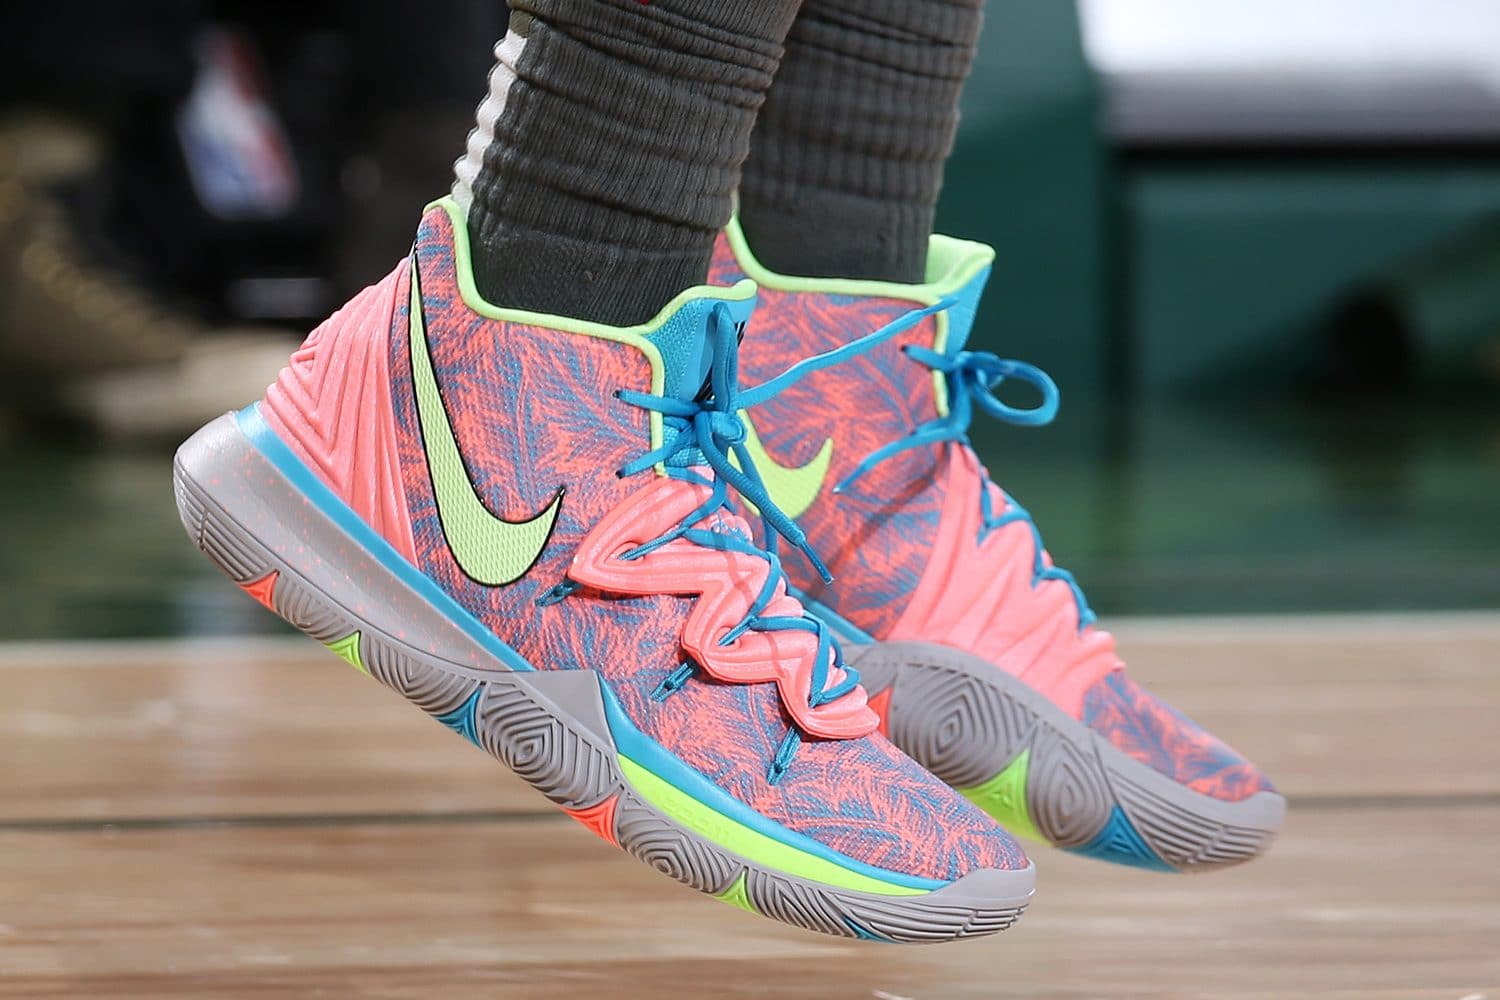 kyrie 5 pink and blue